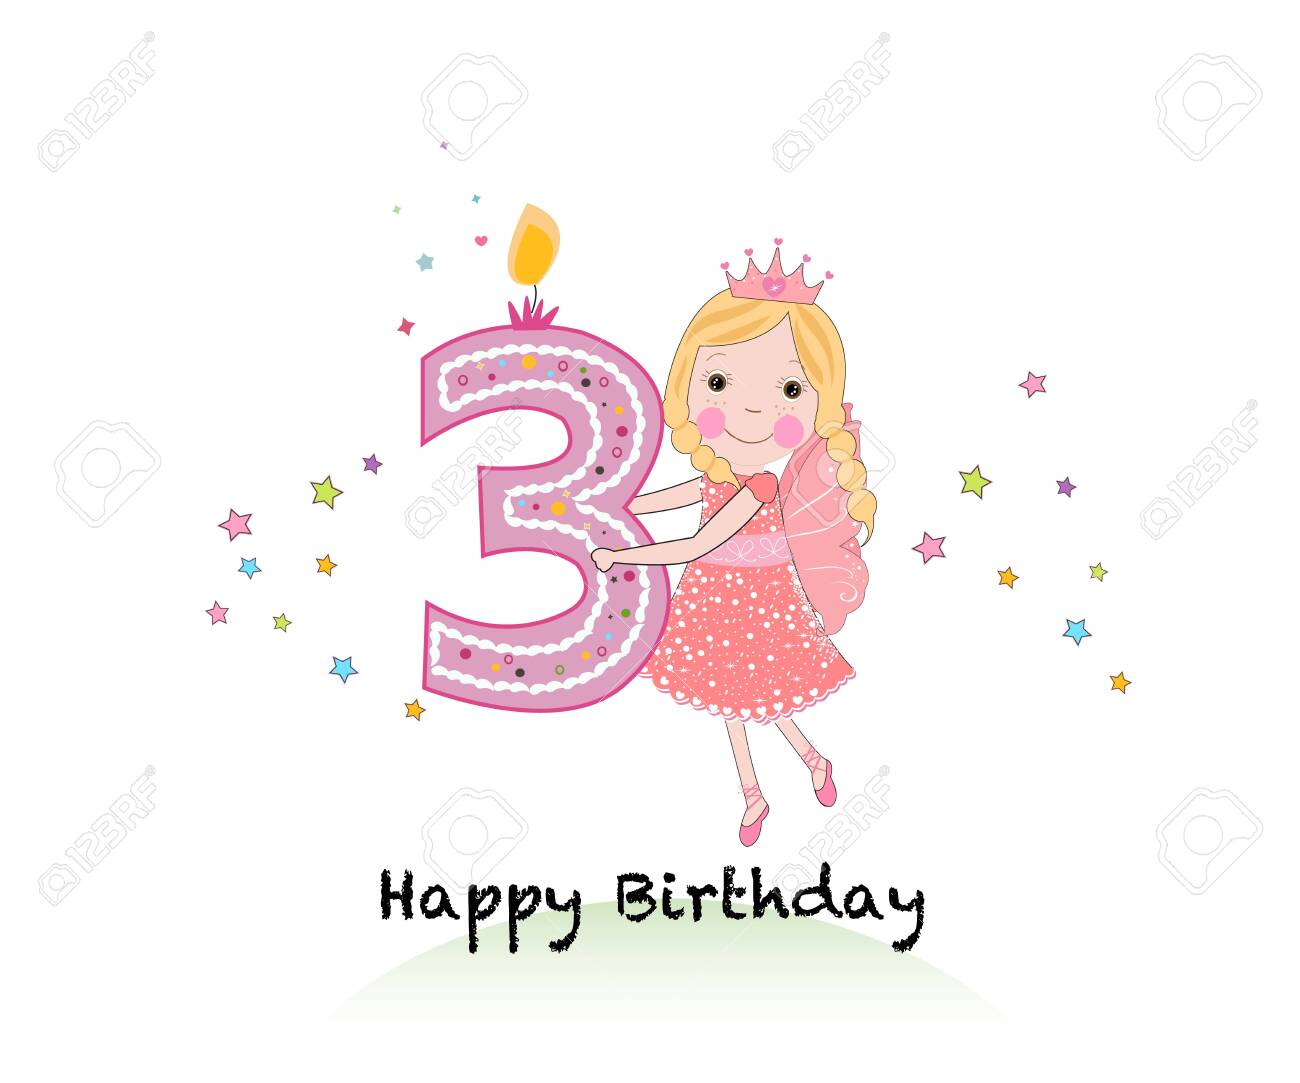 Free download Happy Thirth Birthday Cand Mber Vector Background Royalty ...